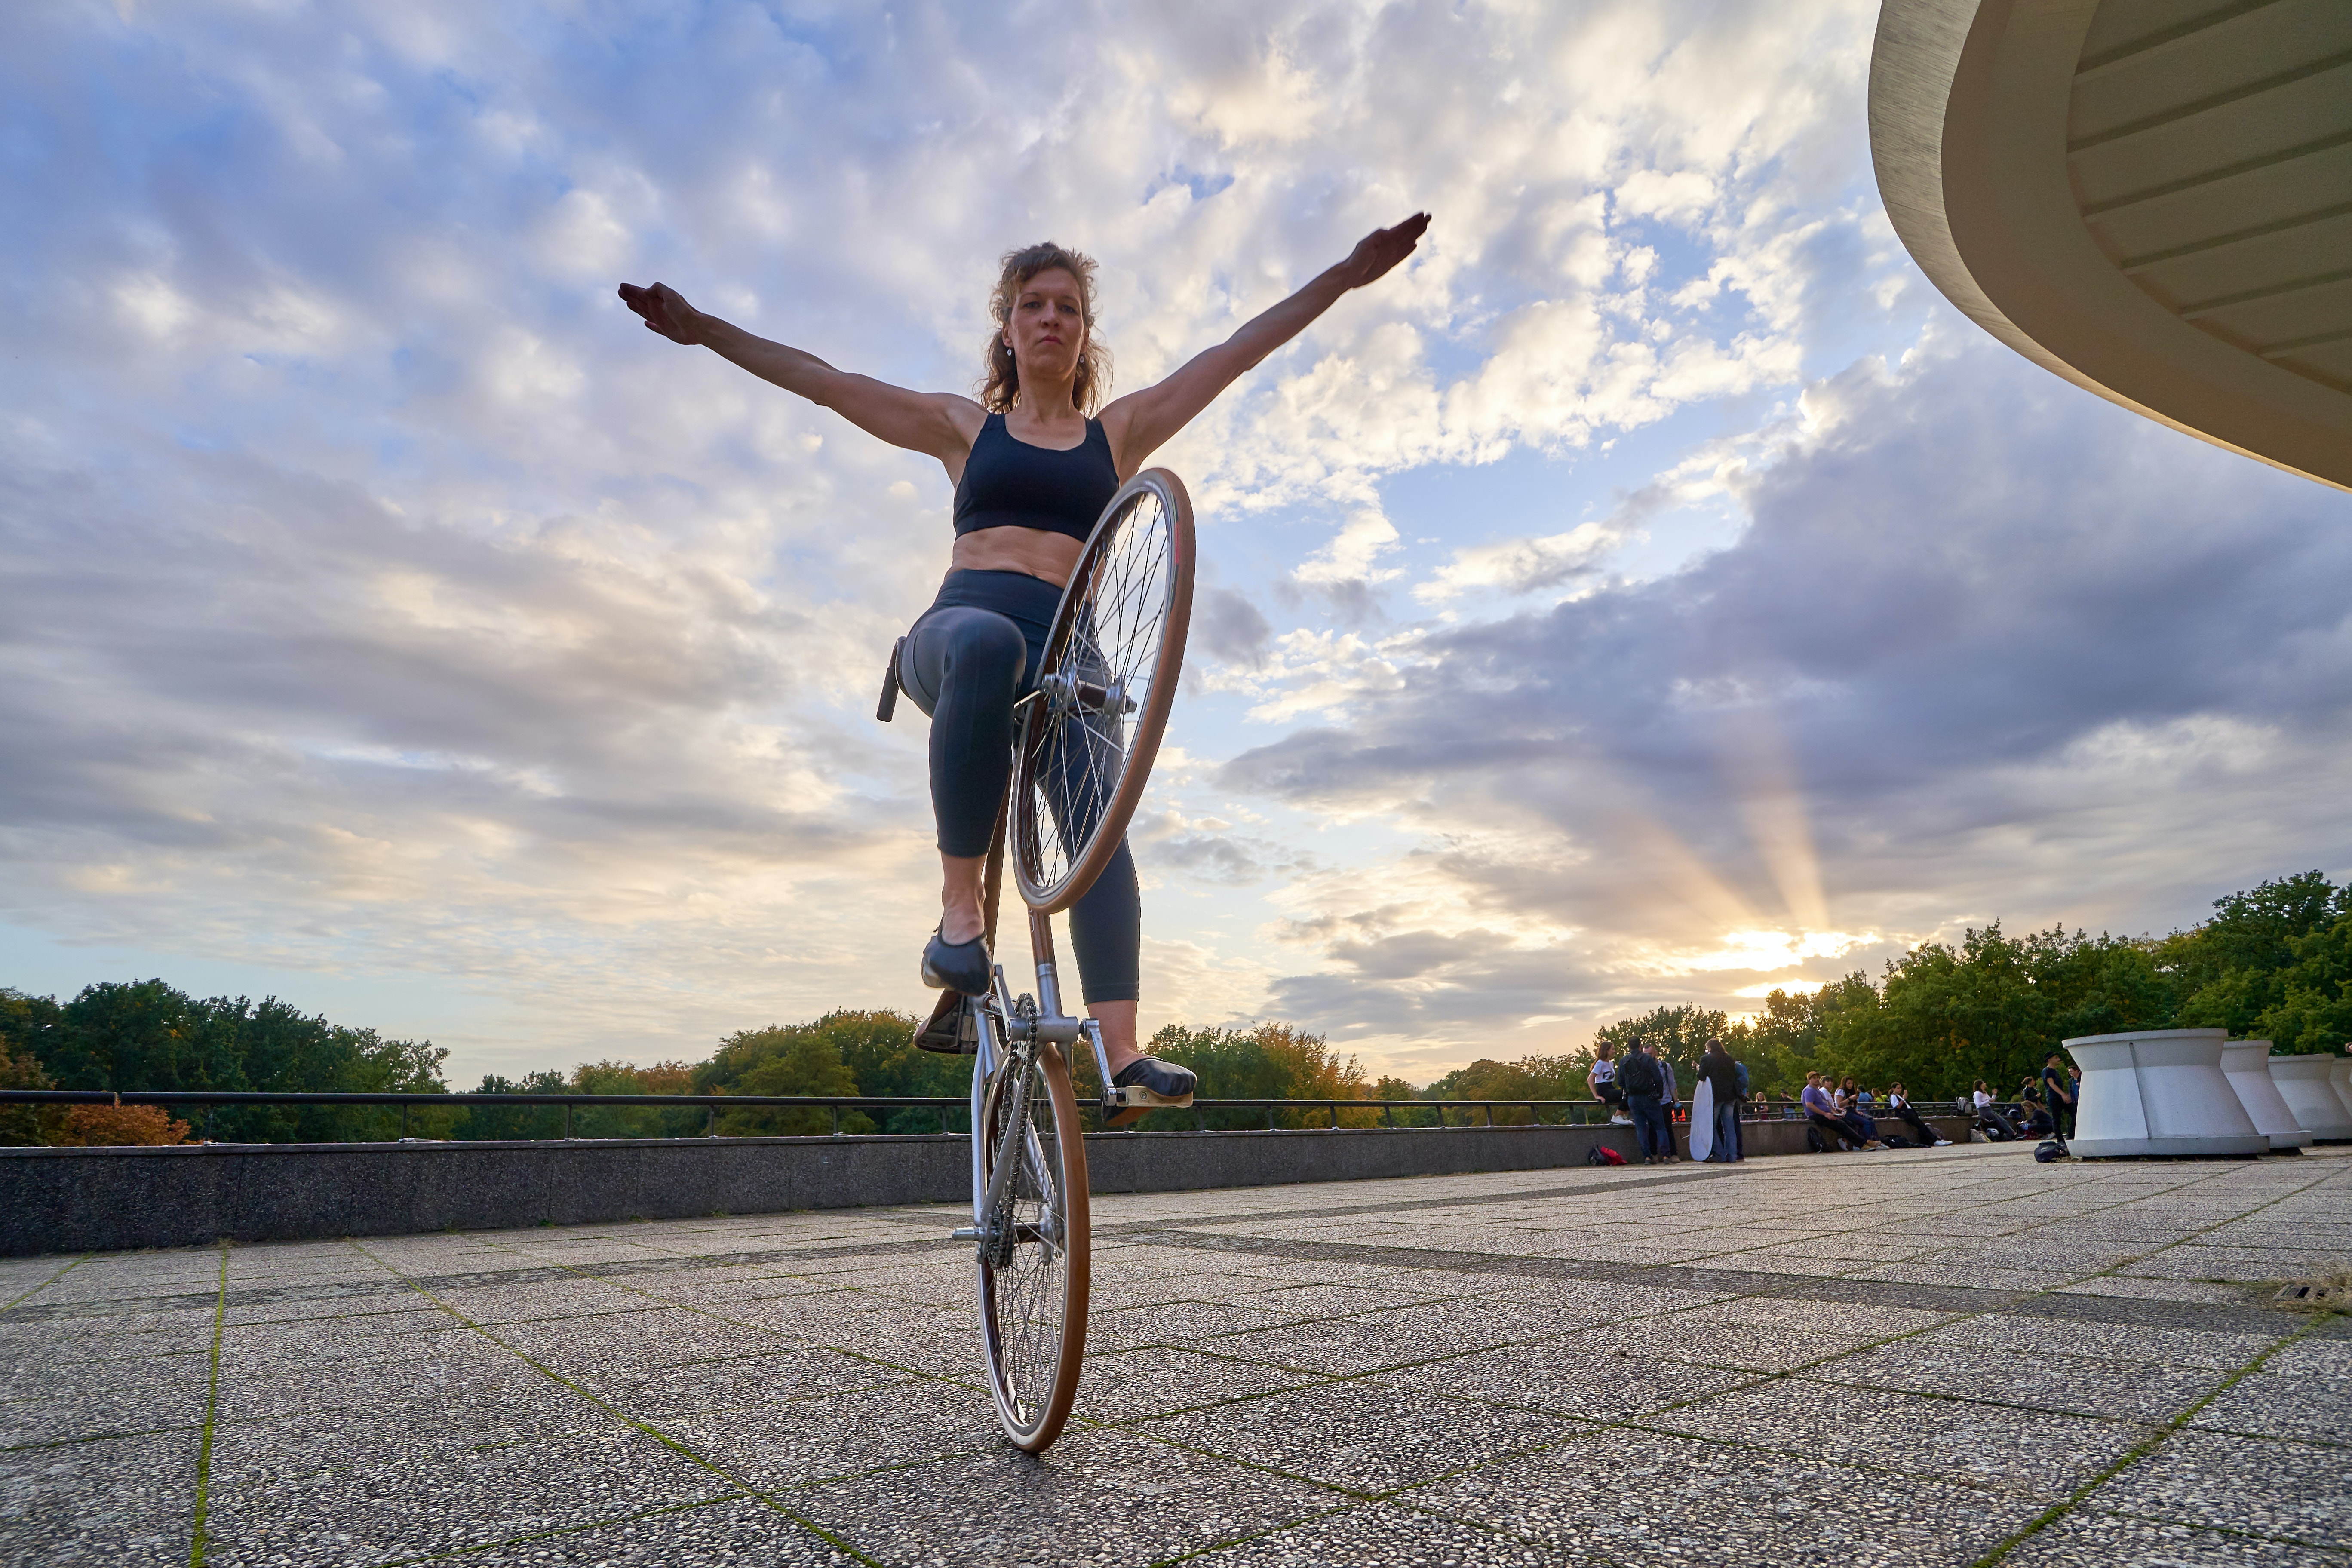 A woman with outstretched arms balancing on the back tire of a bicycle in a public square. The setting sun behind her is causing crepuscular rays in a cloudy sky.